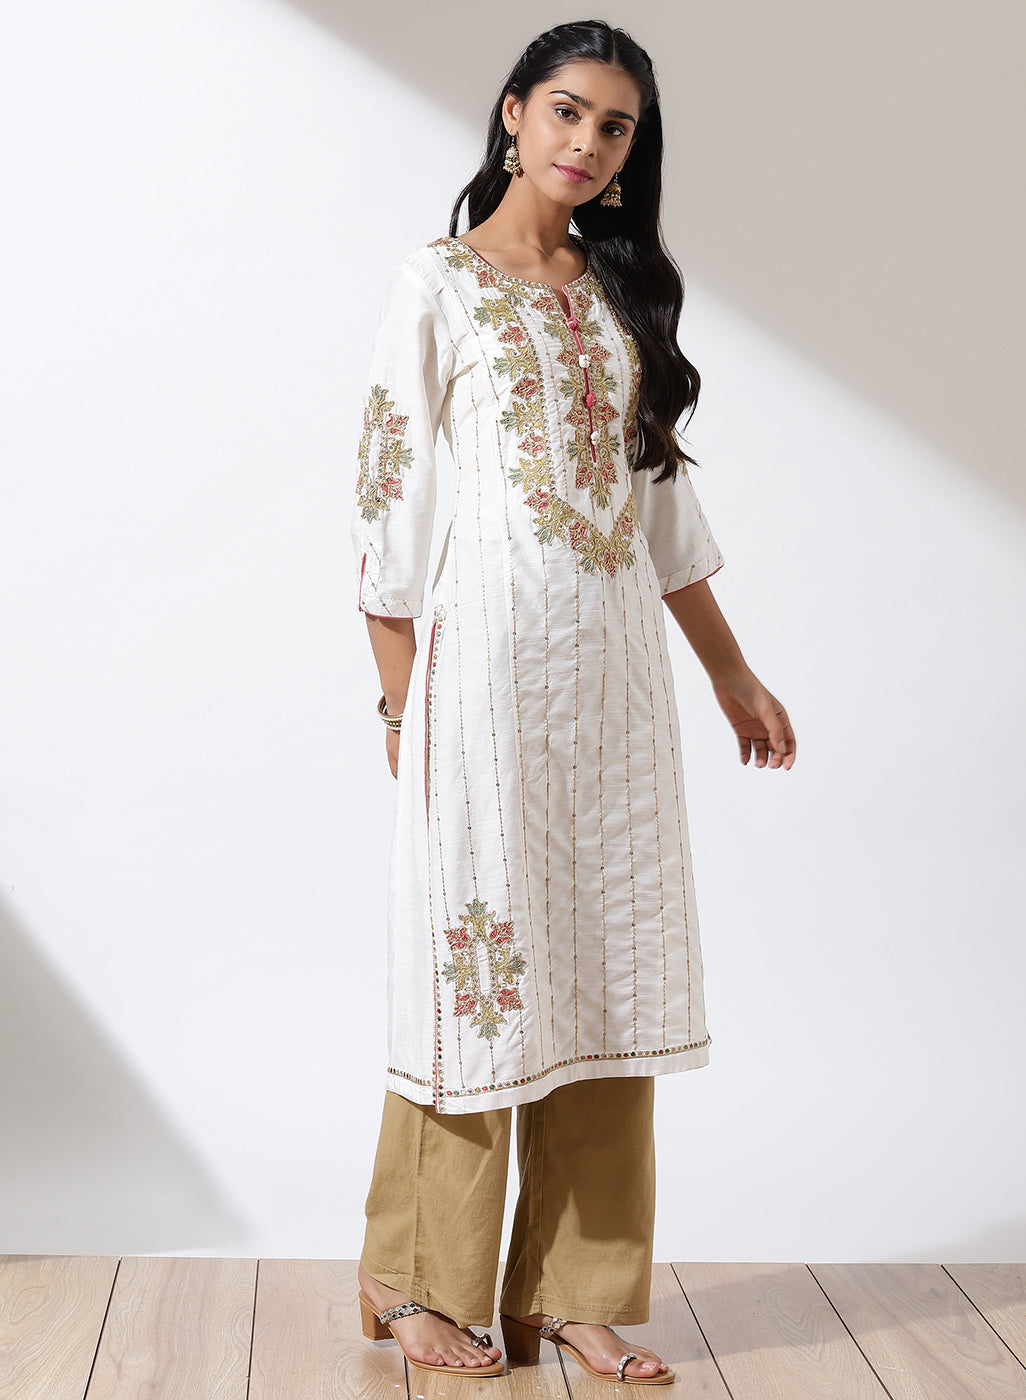 Pearl White Kurta With Delicate Embroidery